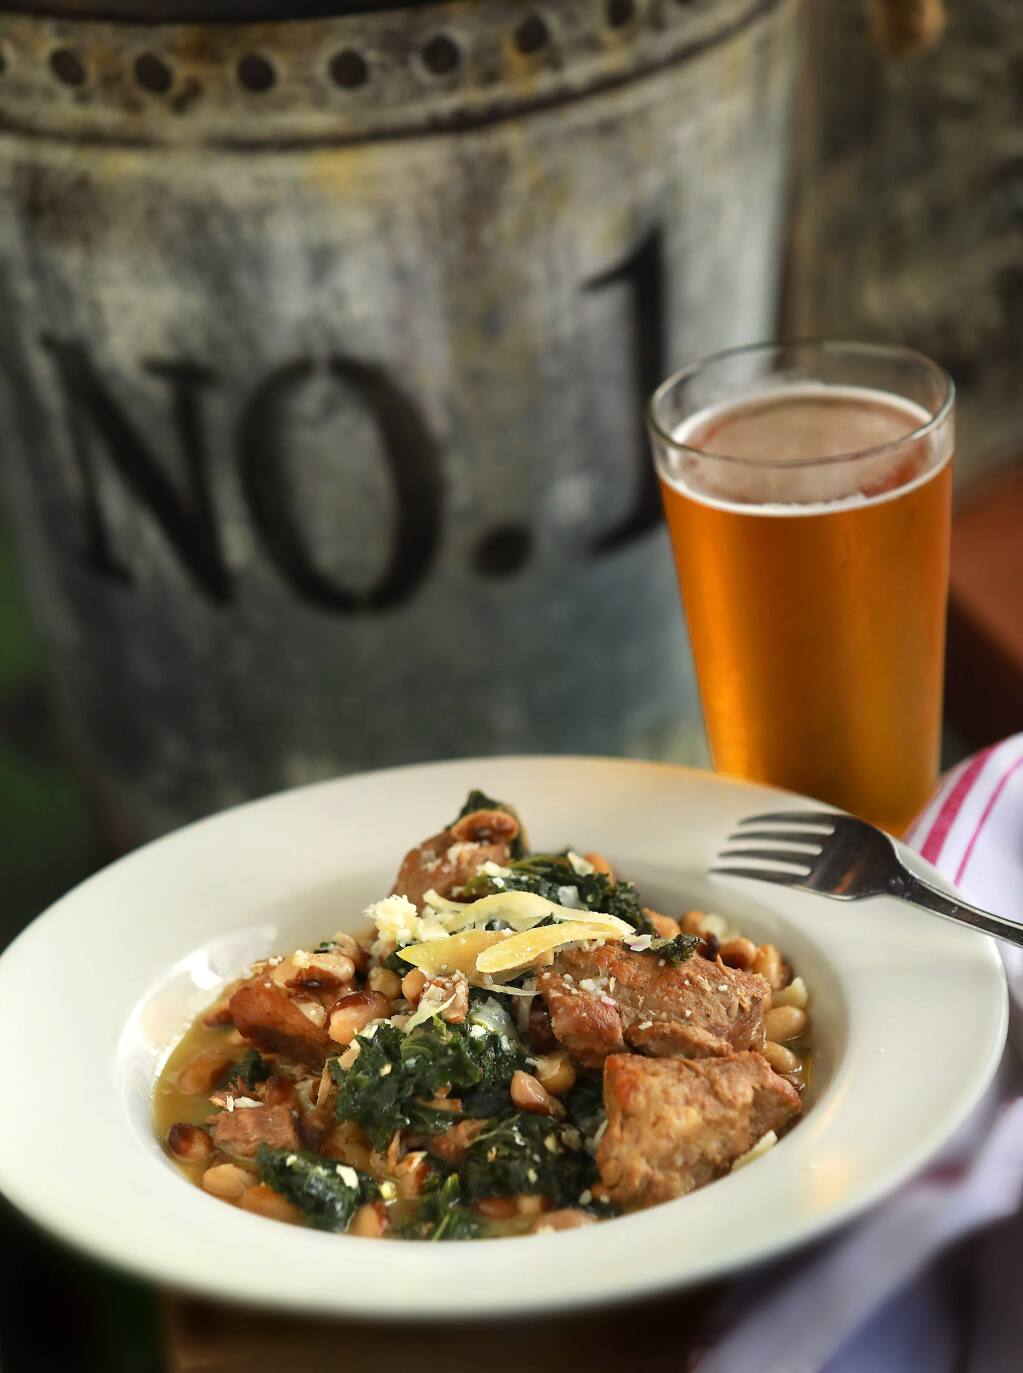 Pork and Heirloom Beans combines braised pork, rancho gordo heirloom yellow eye beans and greens from the Gypsy Cafe in Sebastopol. (John Burgess/The Press Democrat)